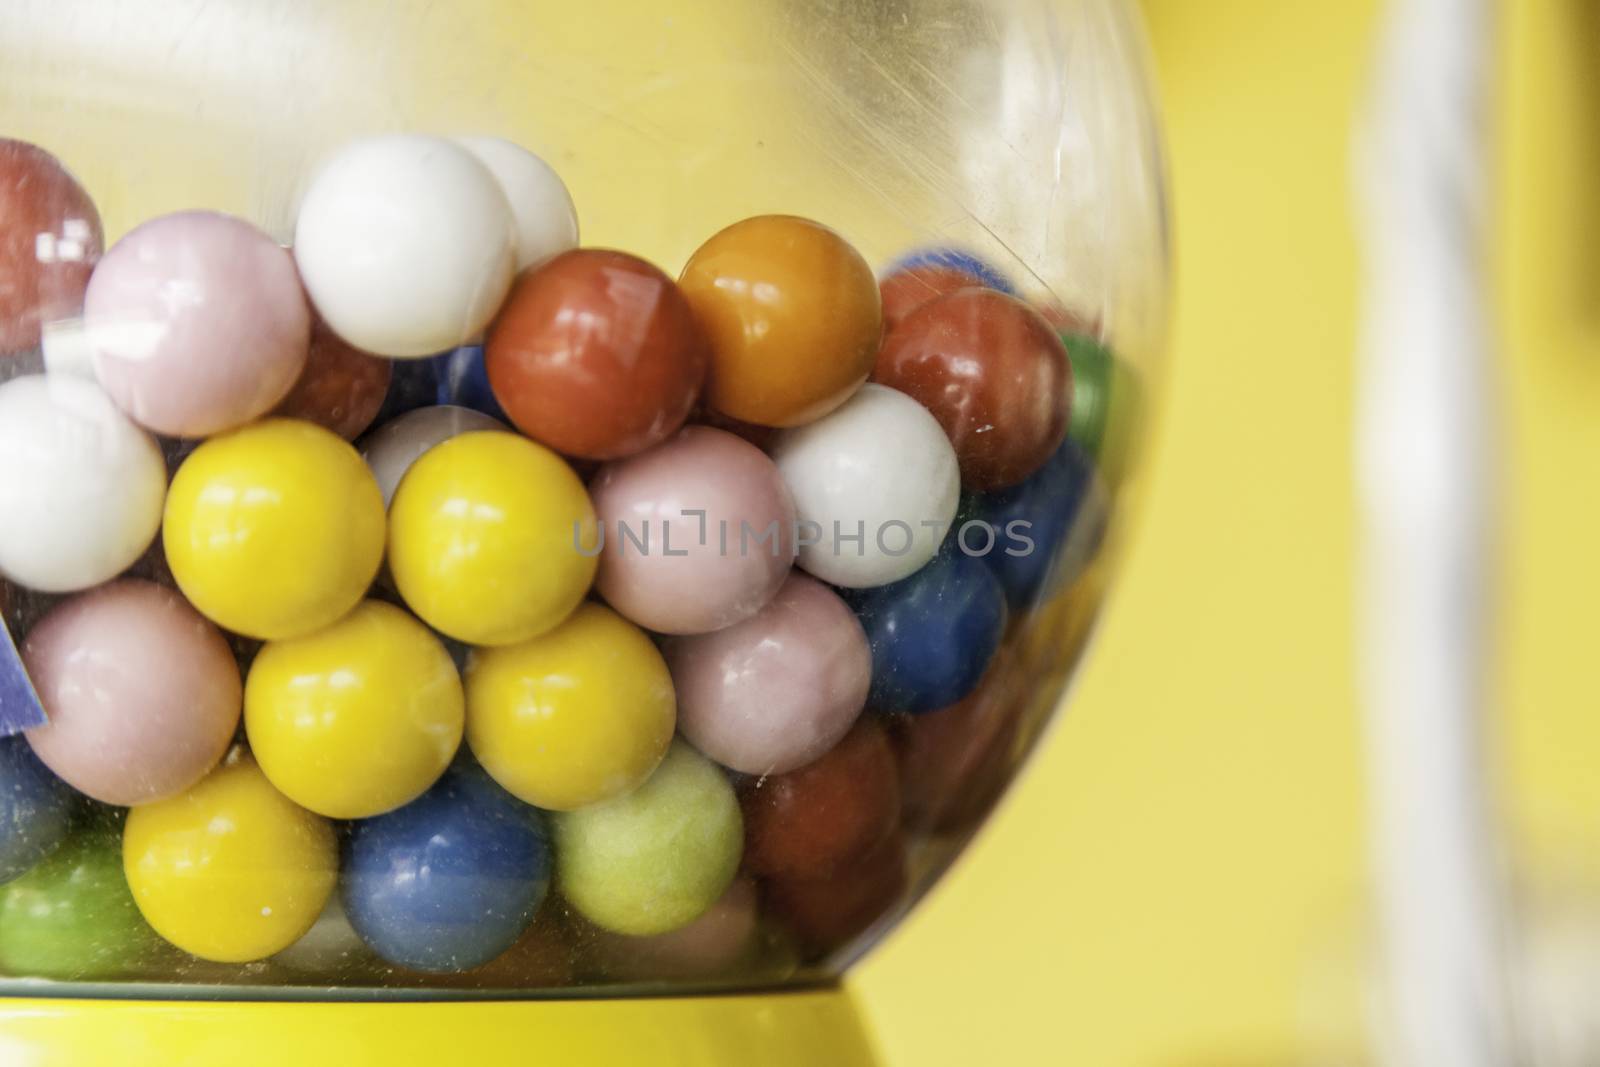 Gumballs in a machine by esebene